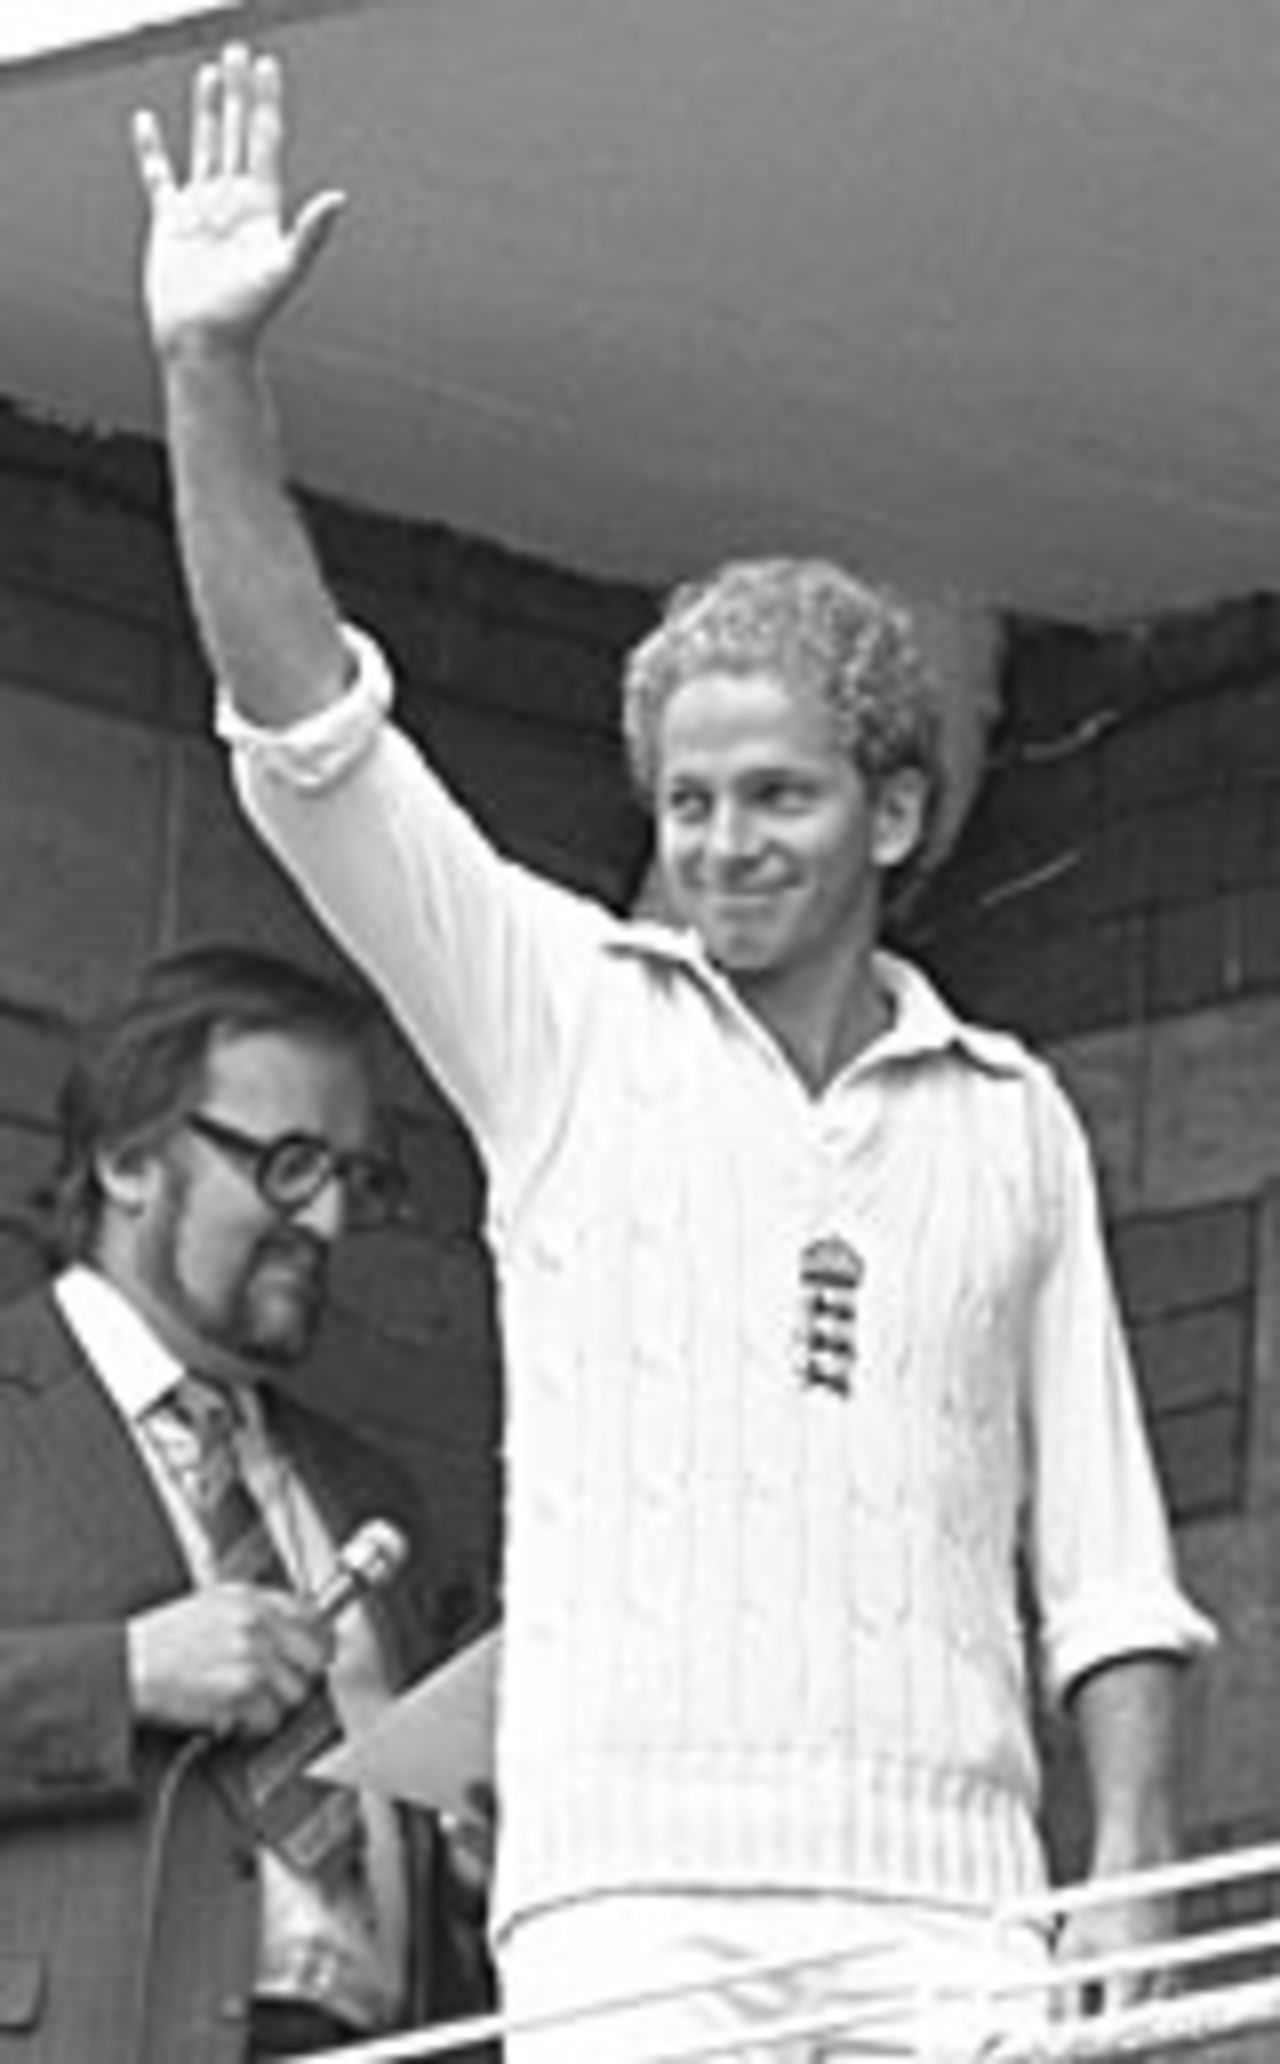 David Gower on the balcony at The Oval, England v Australia, 6th Test, 1985